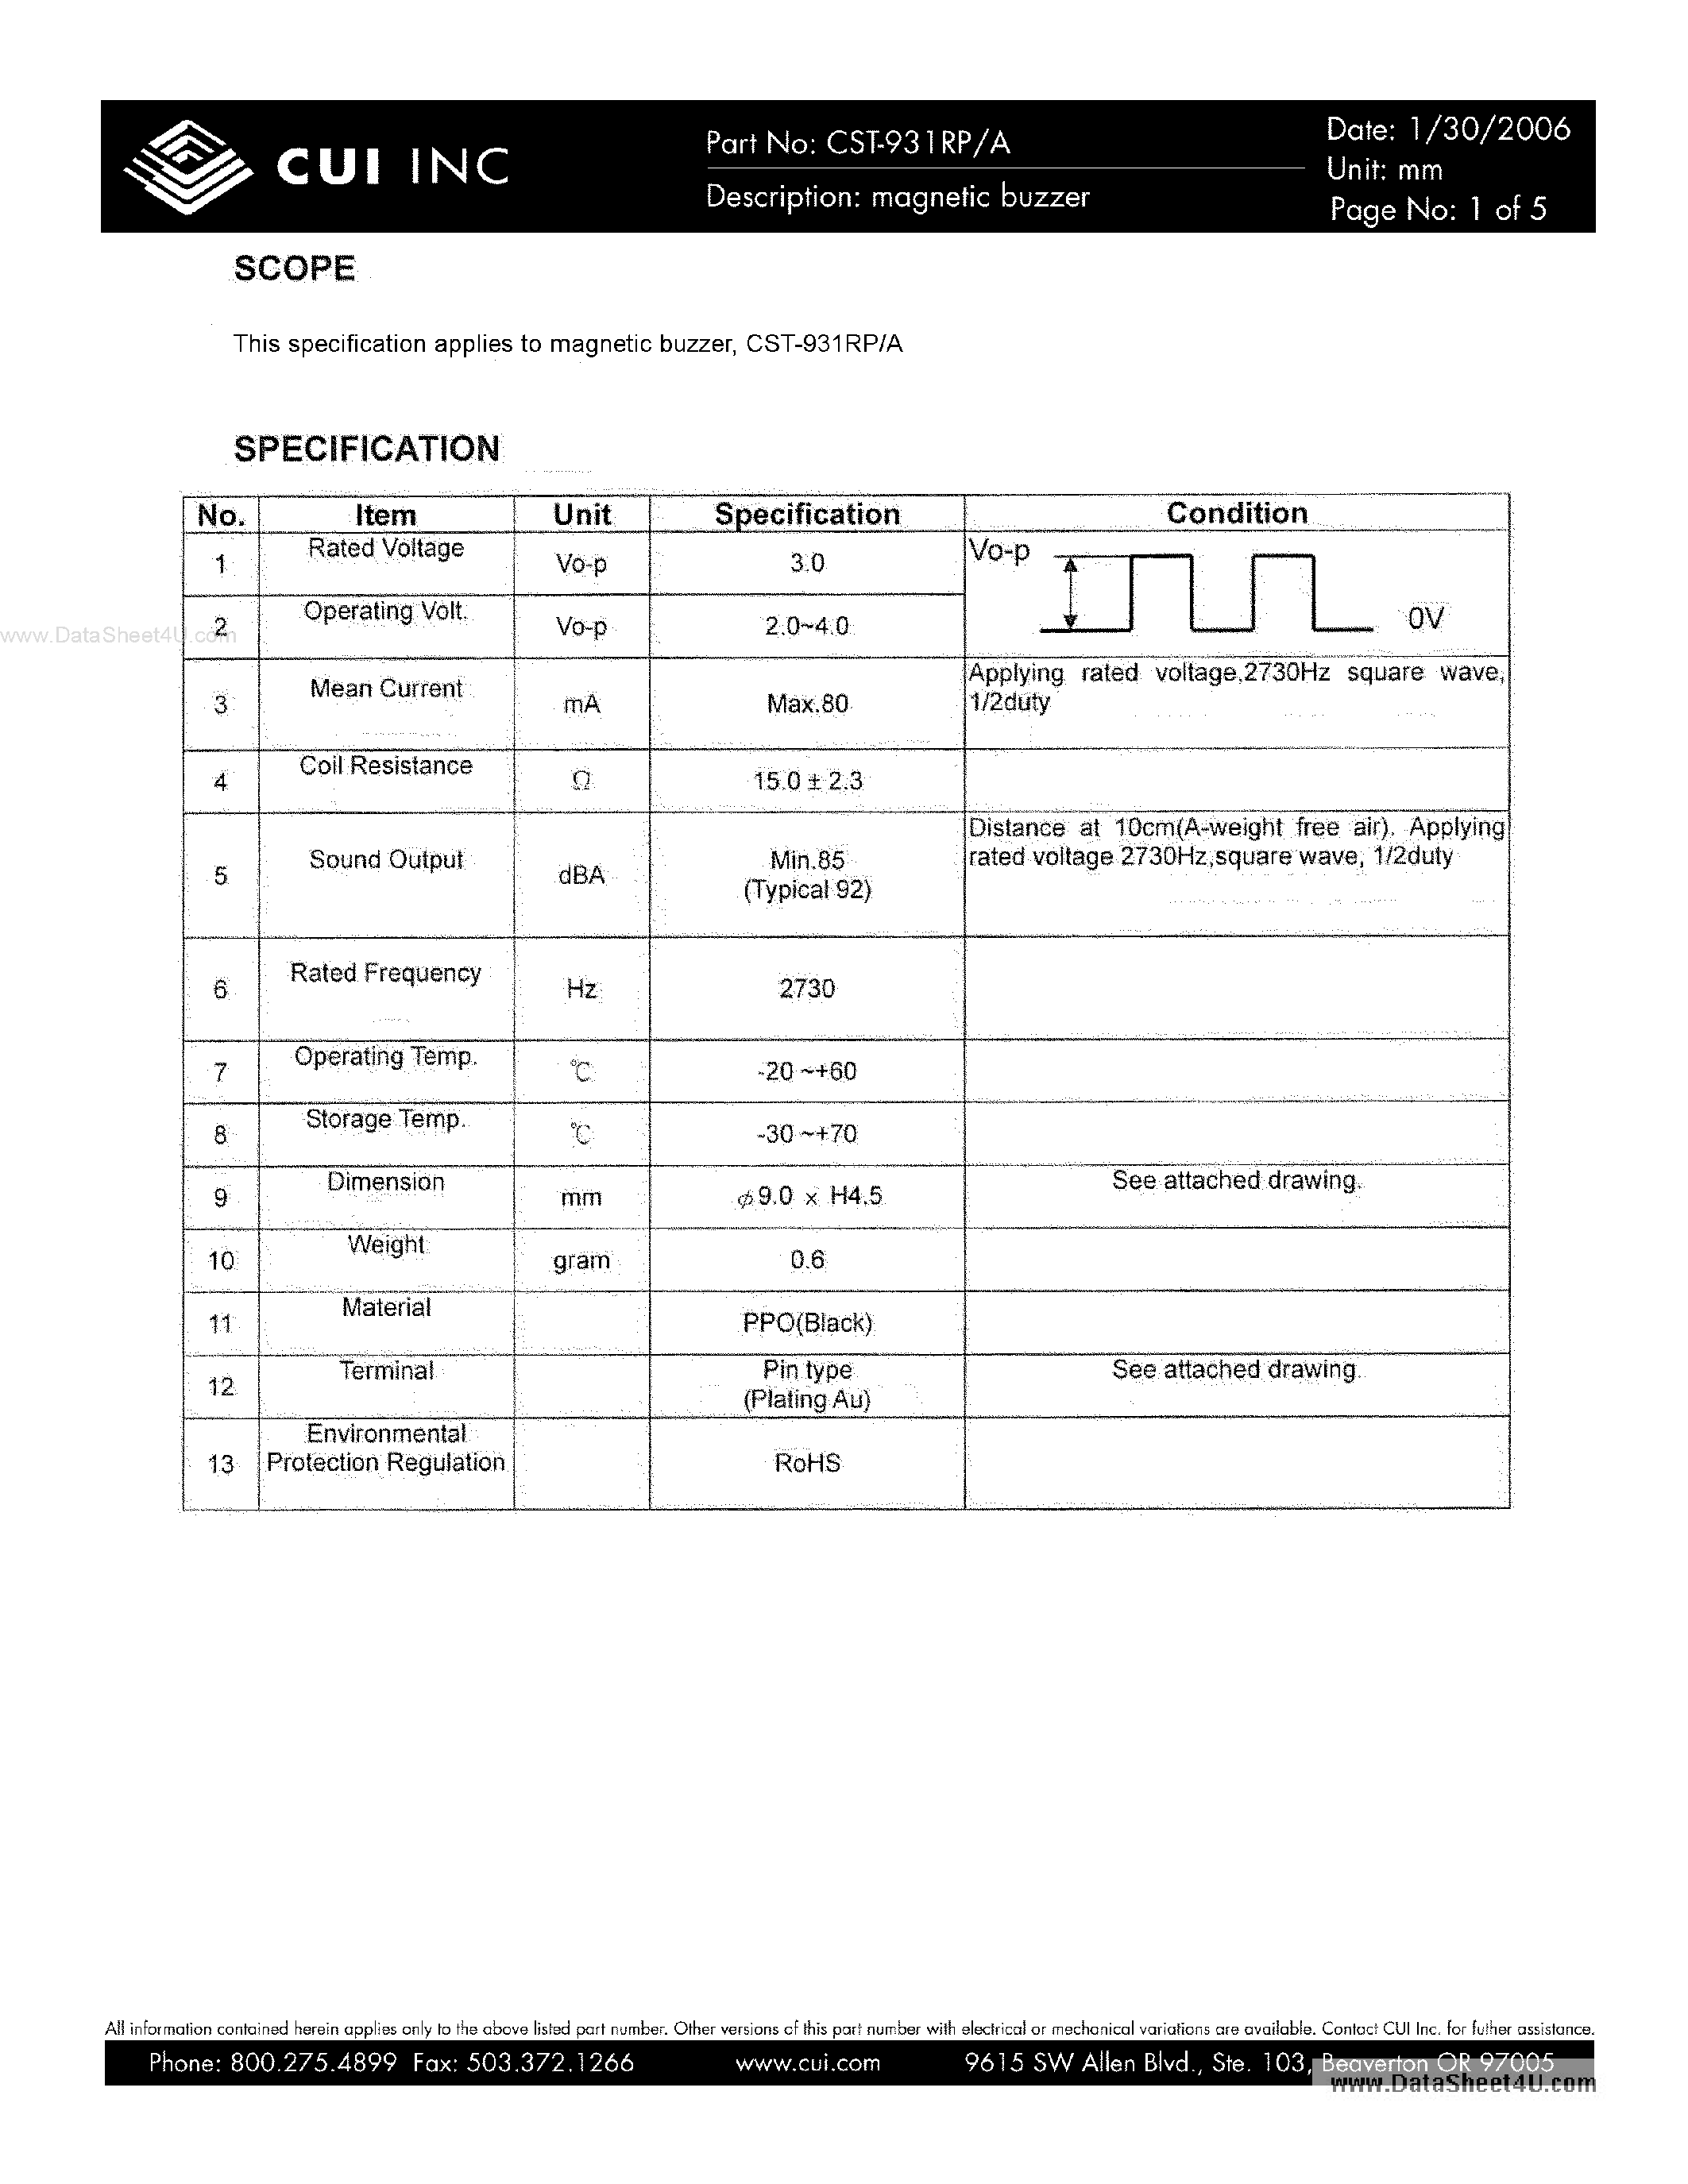 Datasheet CST-931RP - magnetic buzzer page 1